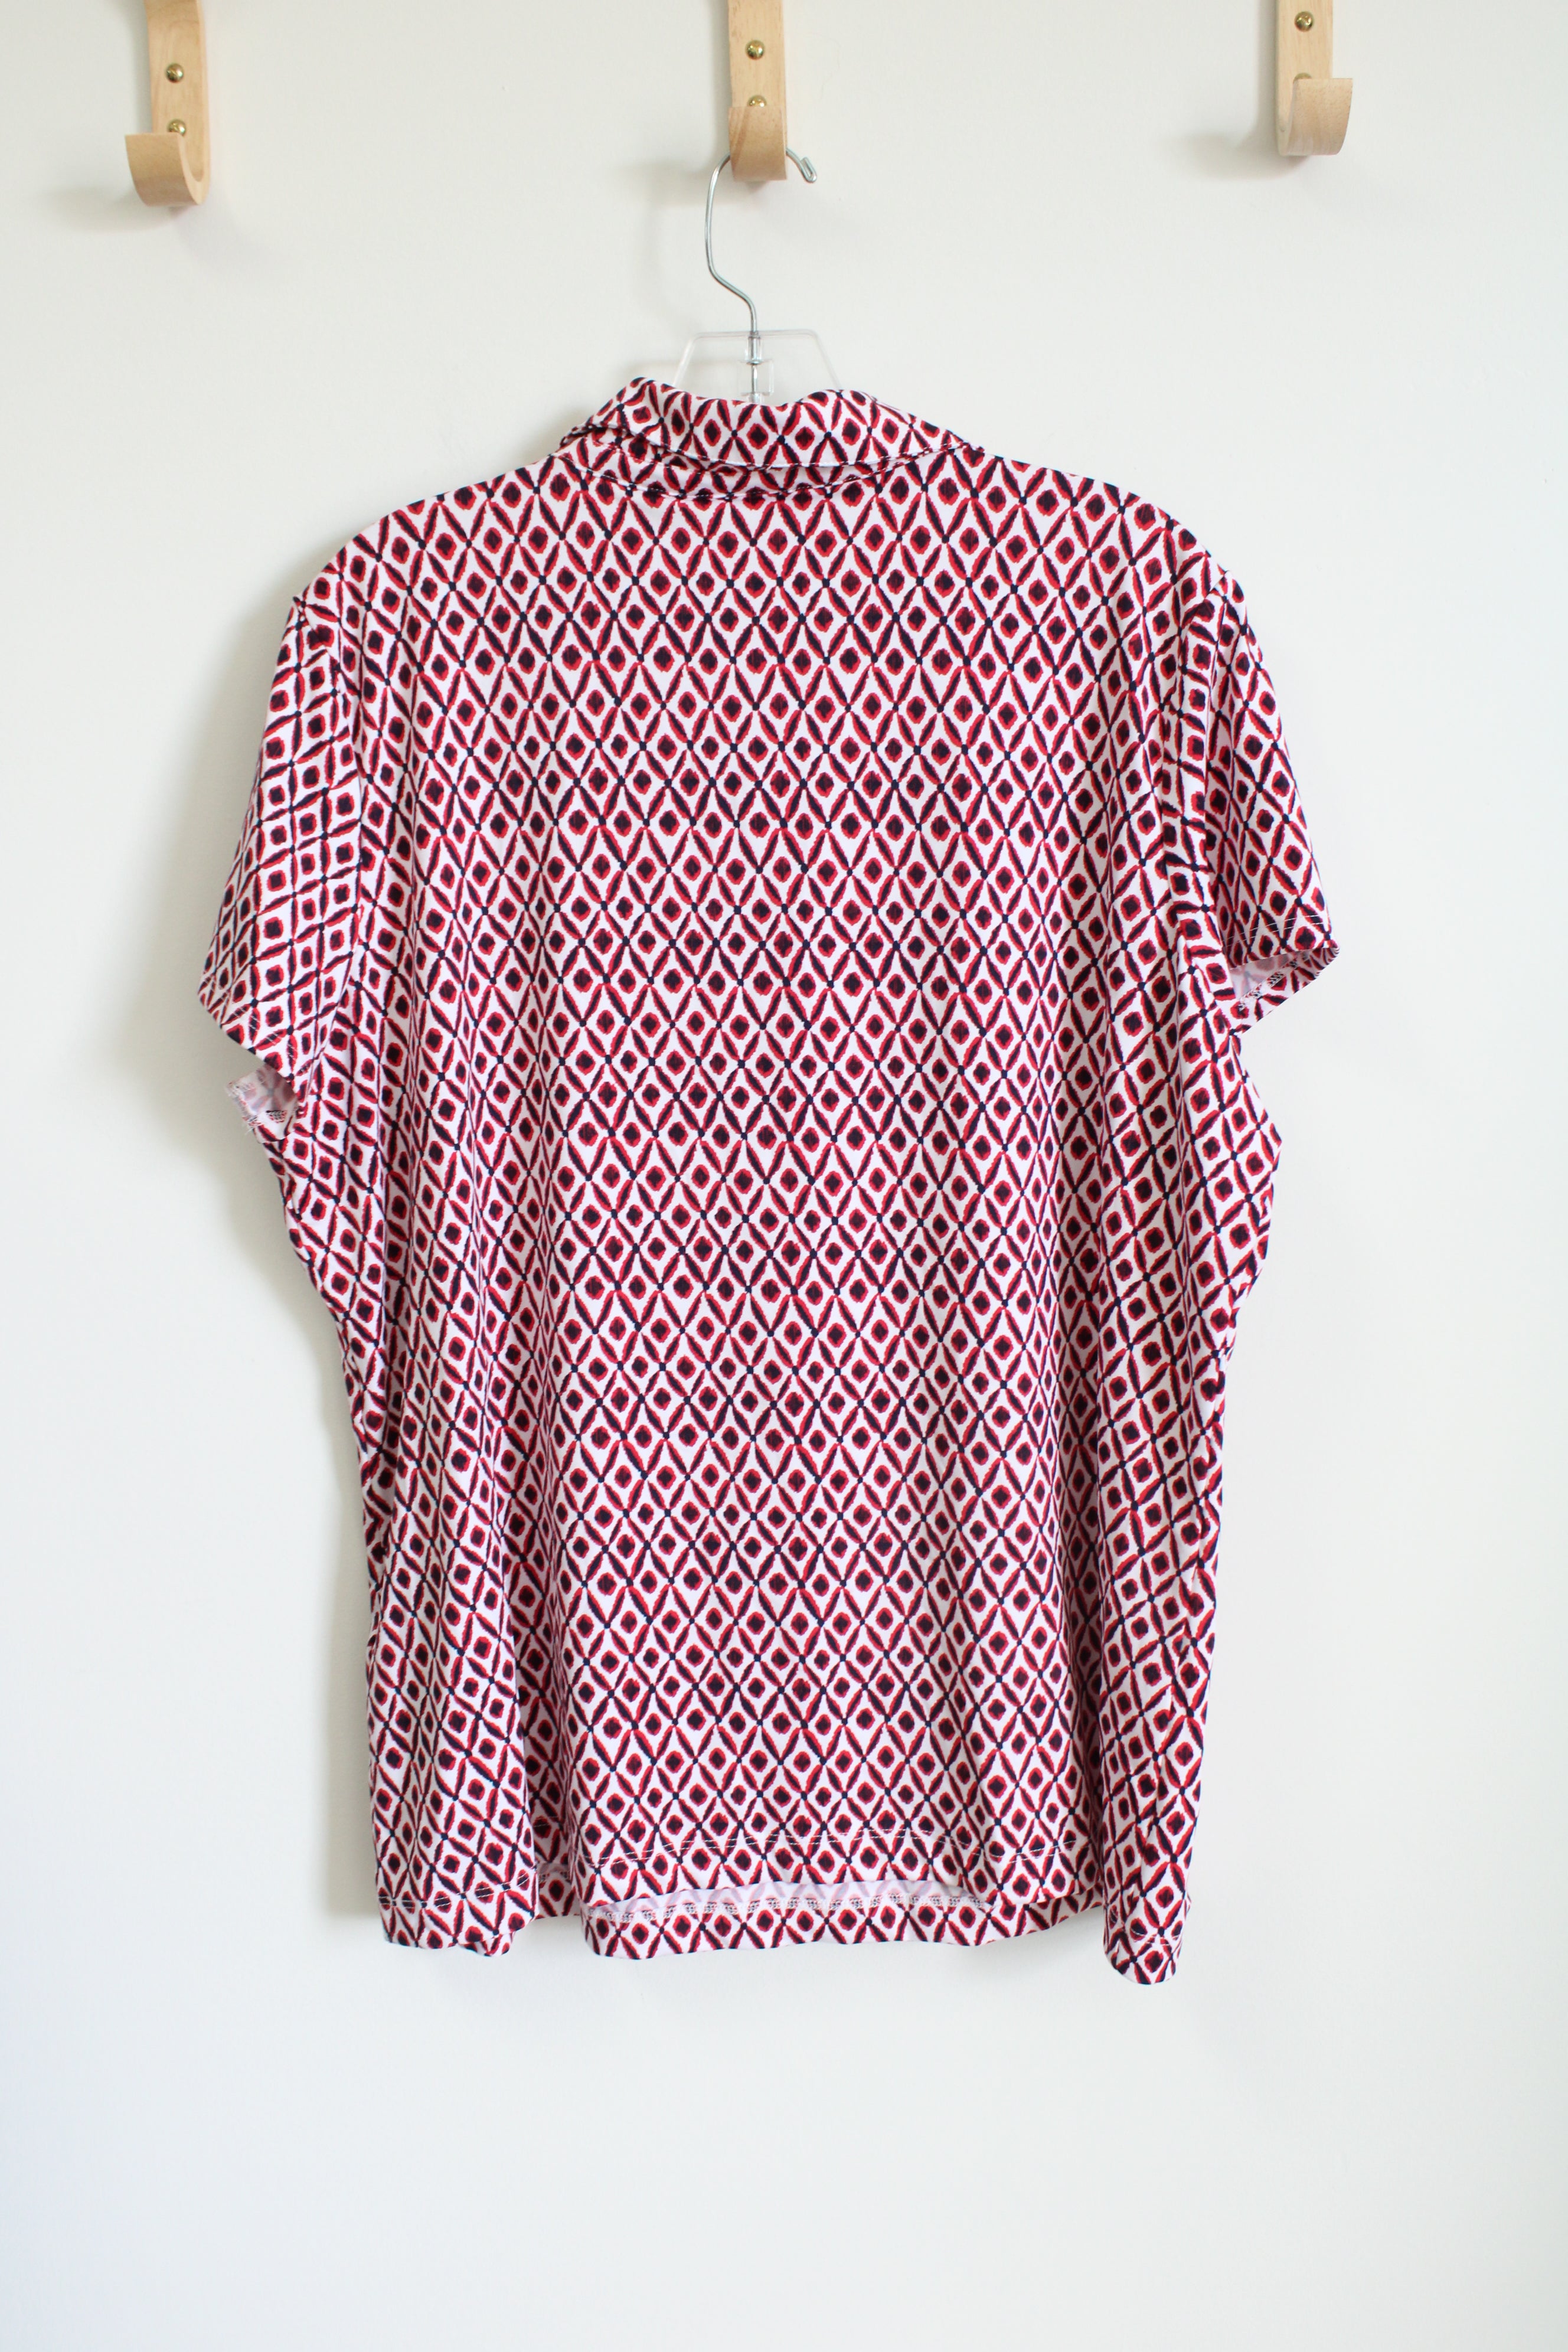 Weekends By Chico's Red Black Patterned Polo Shirt | 3 (XL/16)